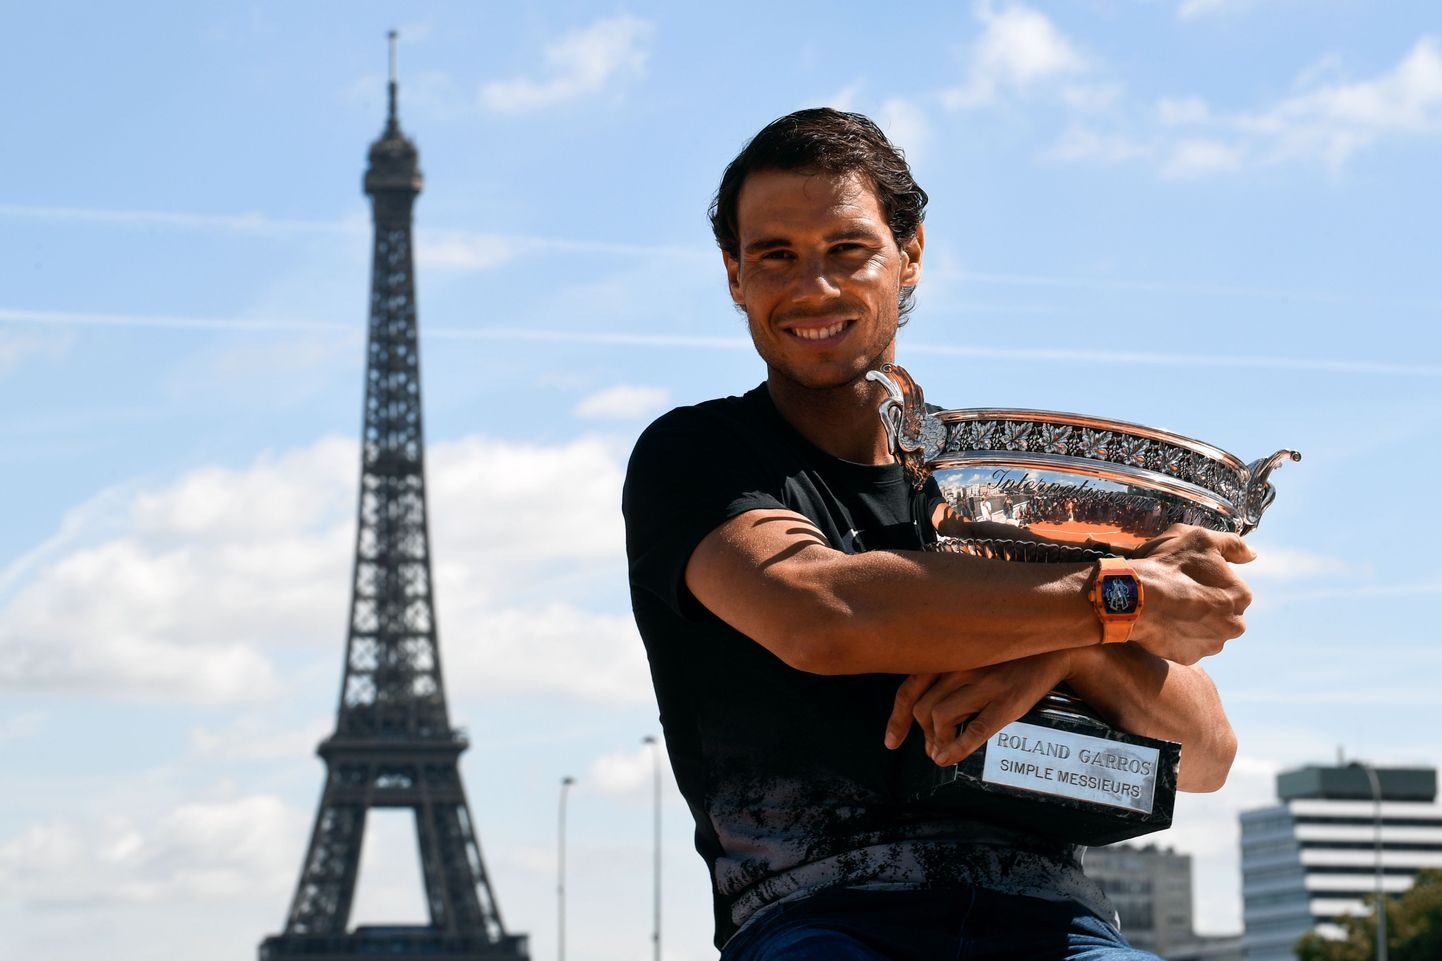 TOPSHOT - Spain's Rafael Nadal poses with the winner's trophy a day after he won the men's Roland Garros 2017 French Open on June 12, 2017 in Paris, with the Eiffel Tower in Background.
 / AFP PHOTO / CHRISTOPHE SIMON